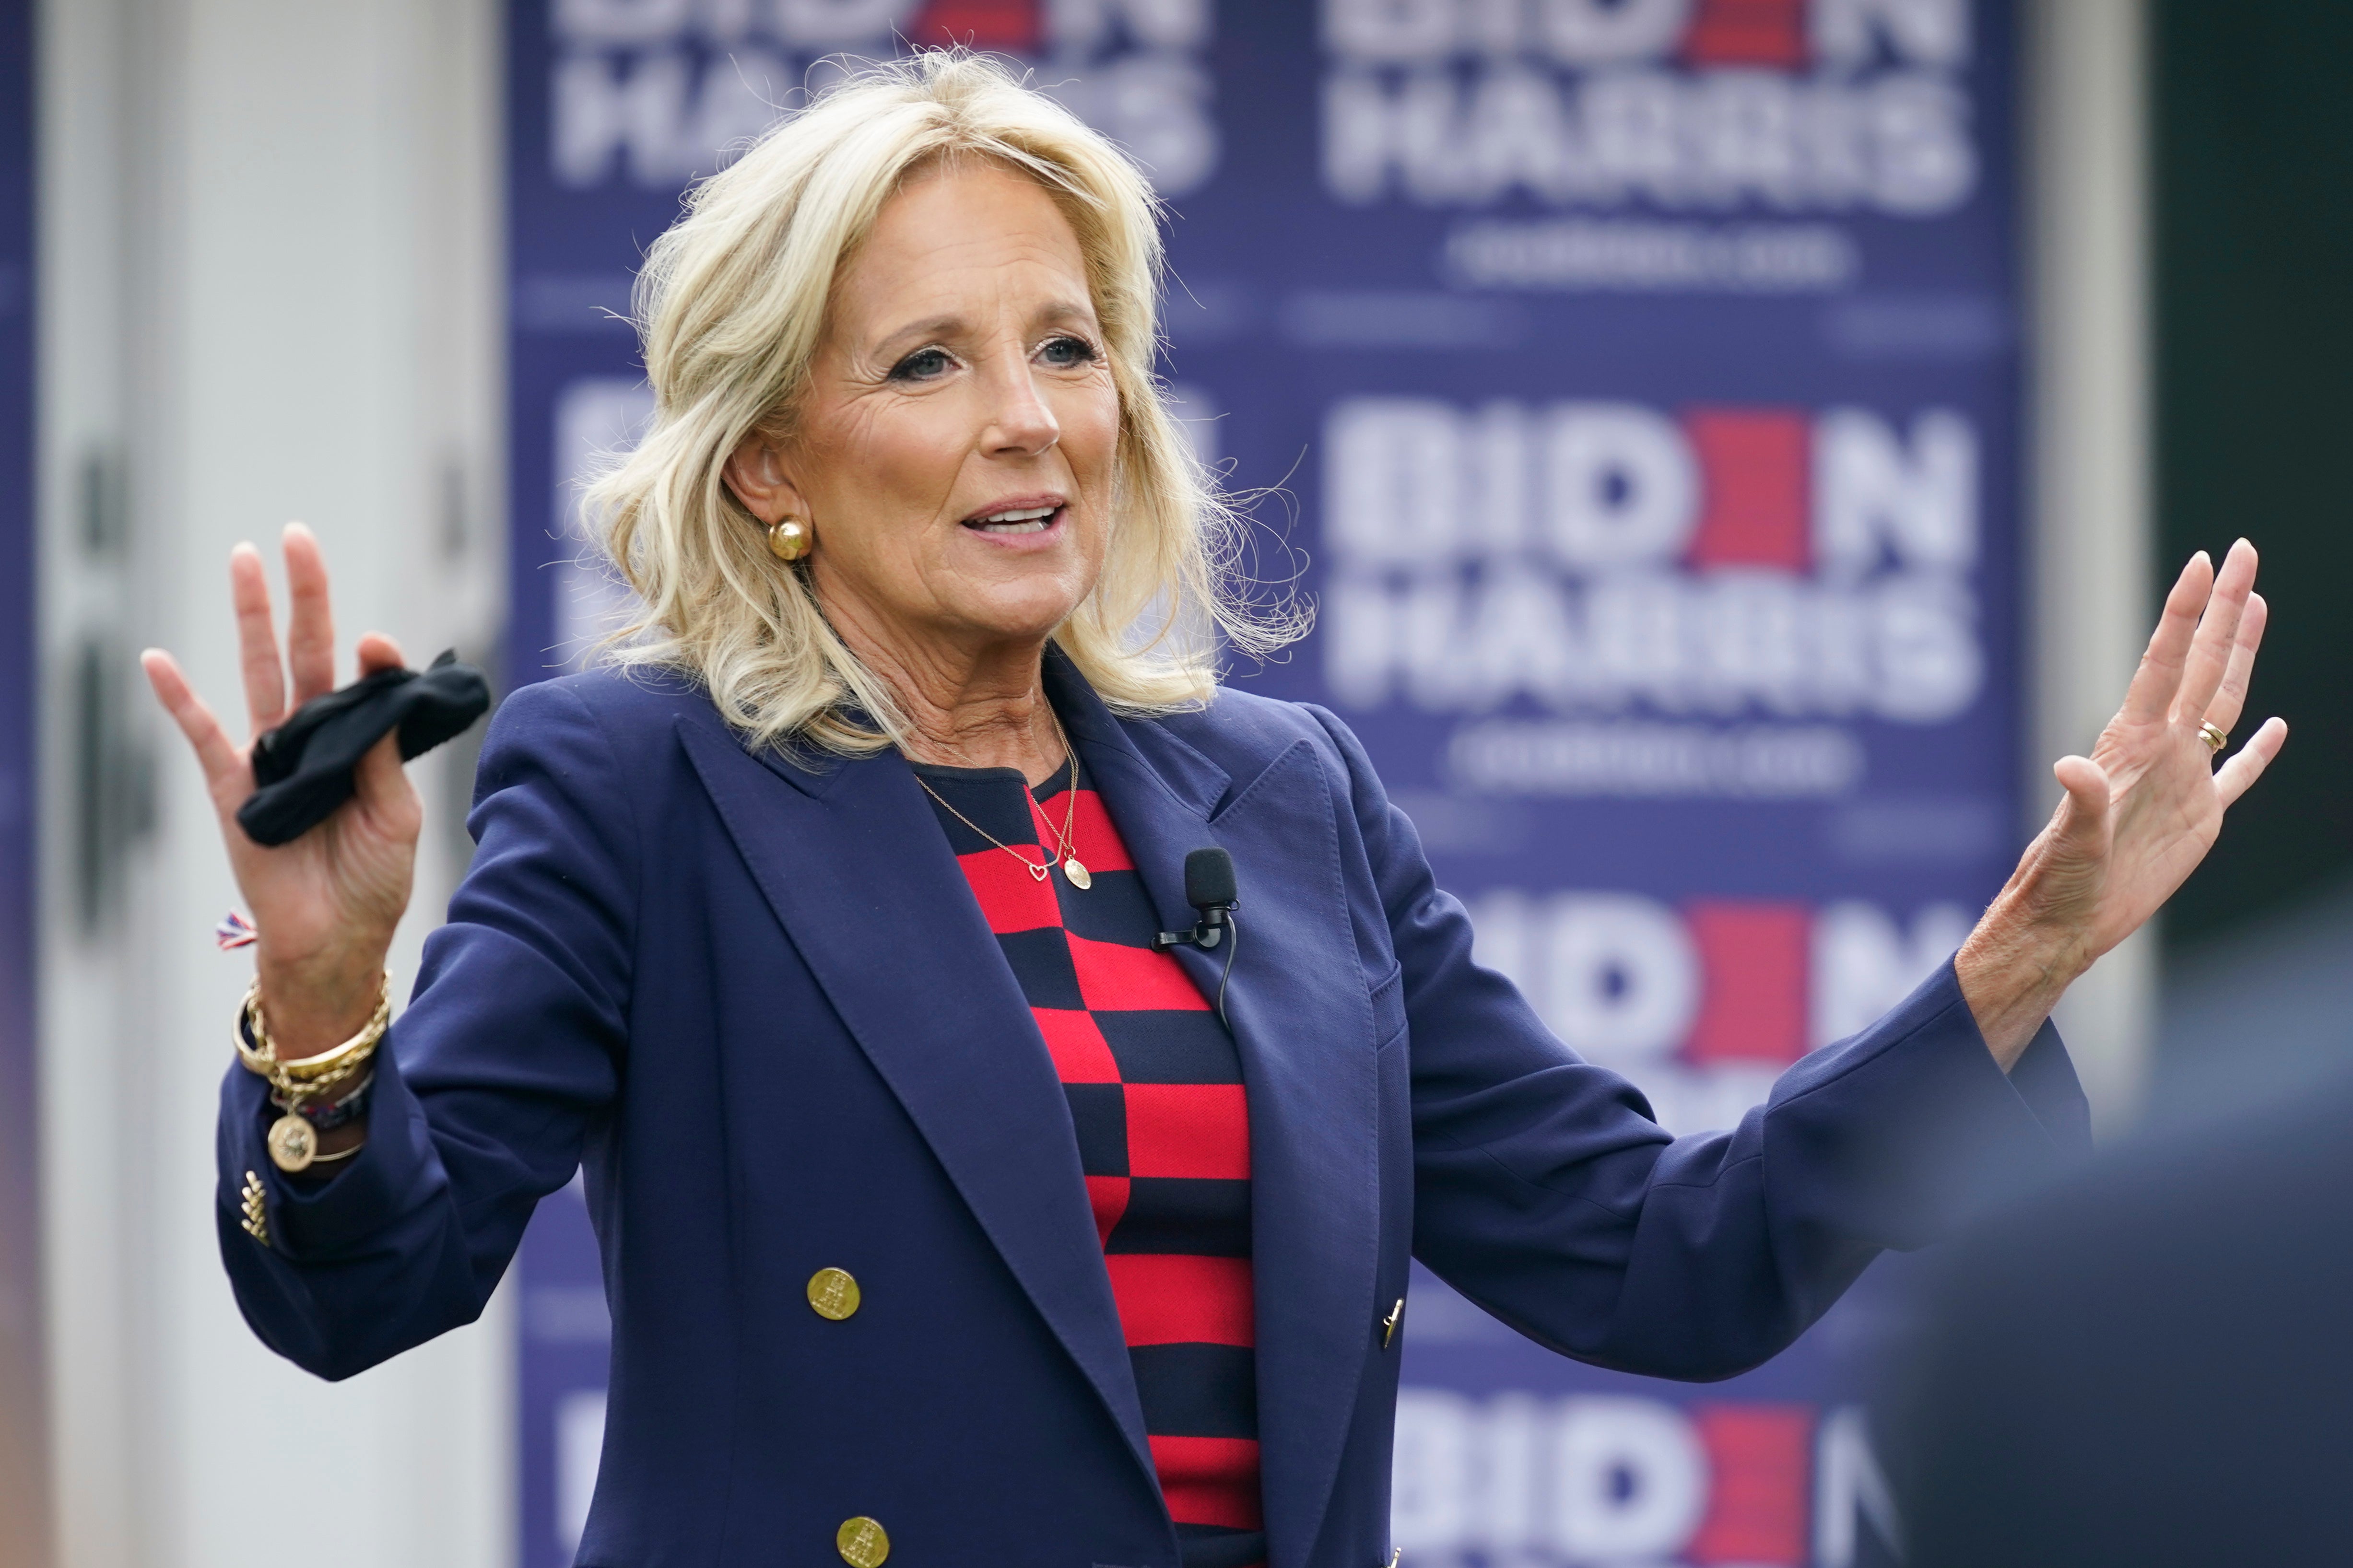 Jill Biden, wife to the Democratic presidential nominee, disputes 'gaffe' claims